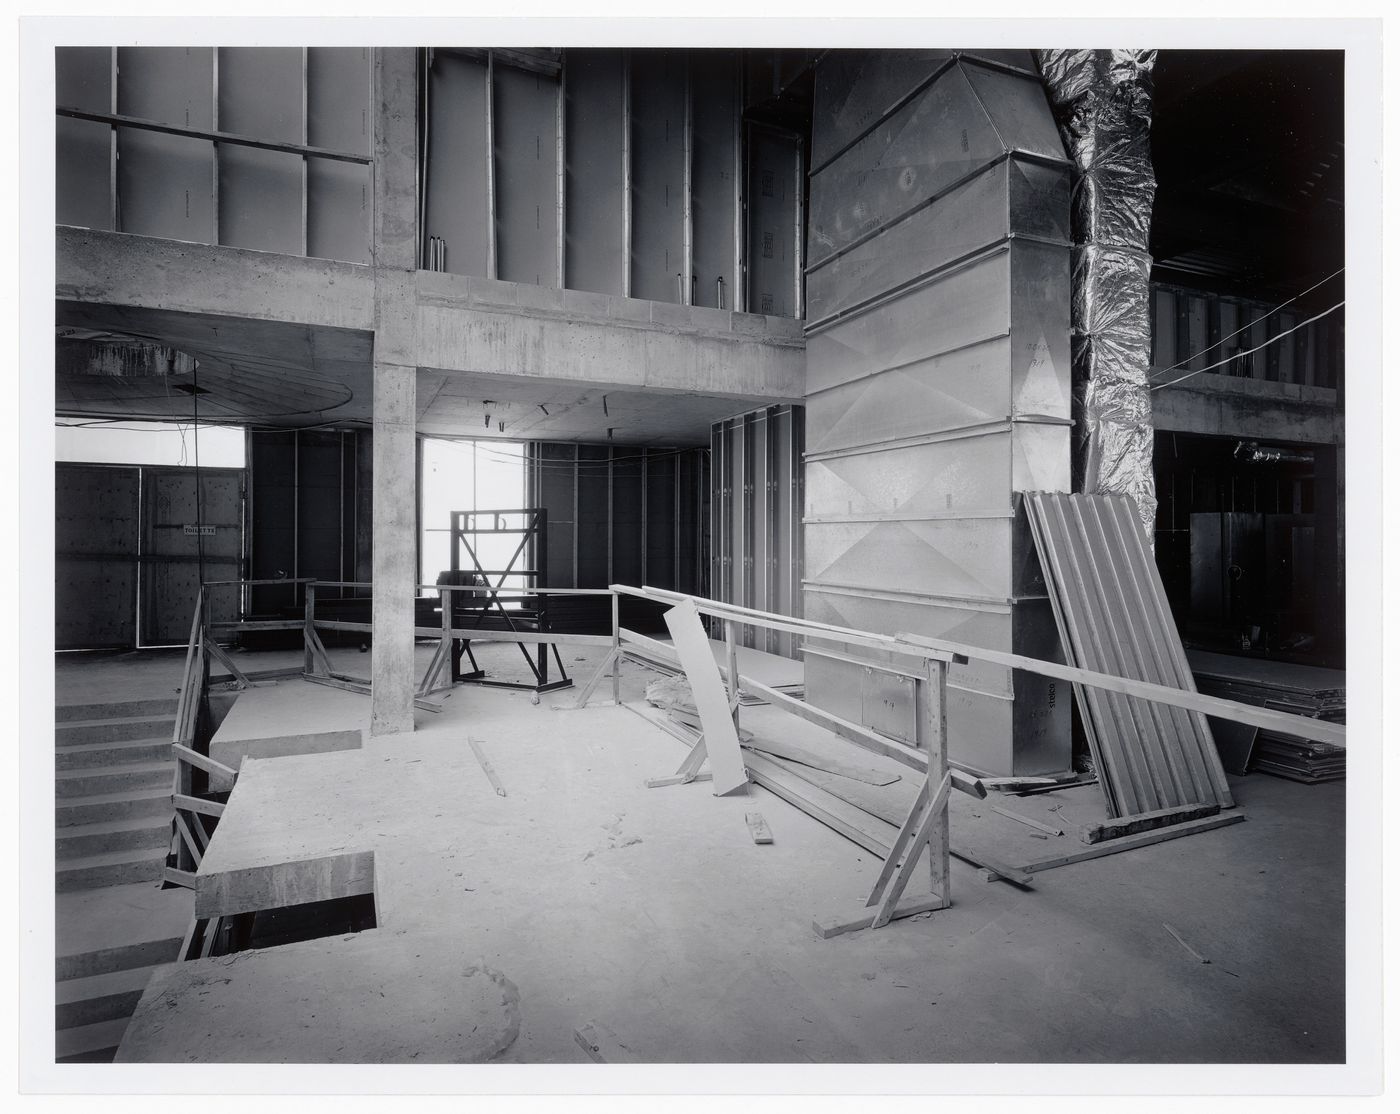 Interior view of the Entrance Court showing air ducts and building materials, Canadian Centre for Architecture under construction, Montréal, Québec